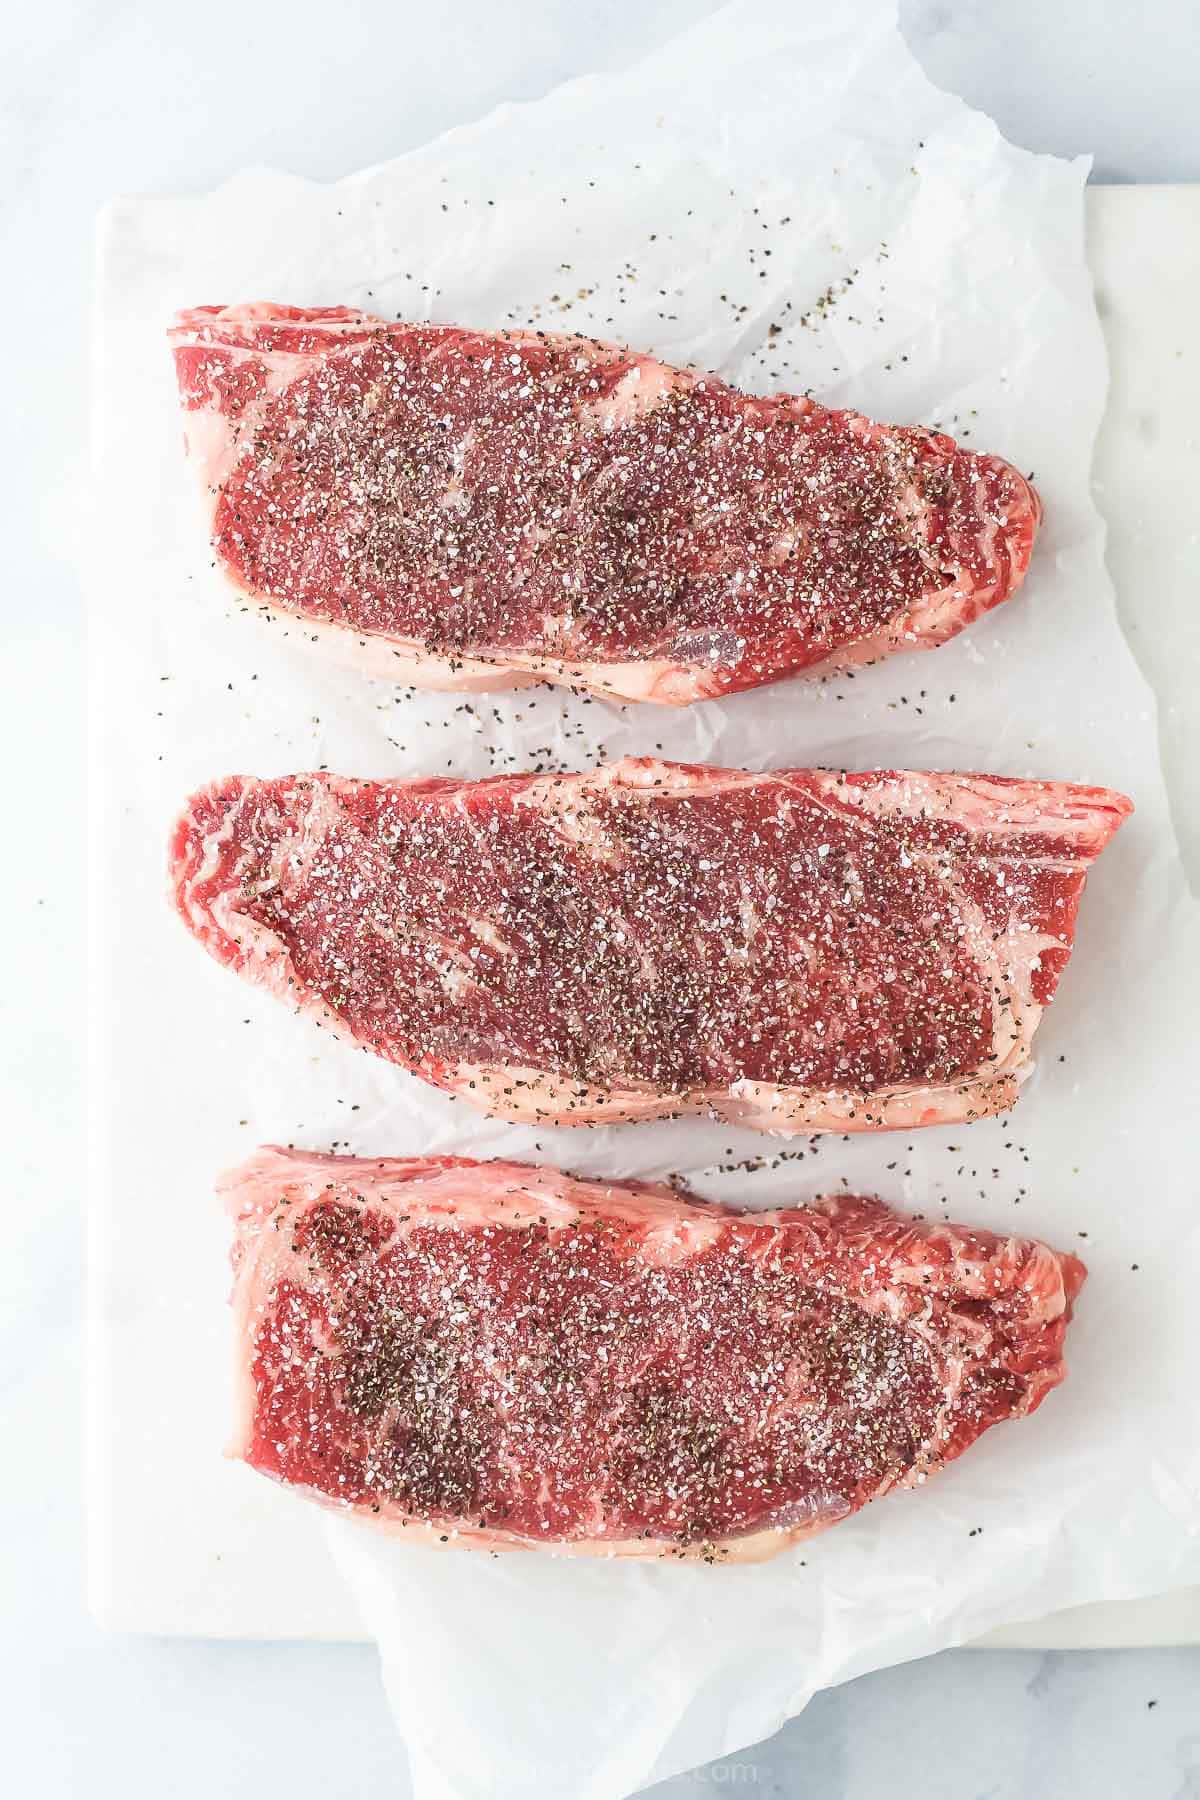 Season the raw steak with salt and pepper.